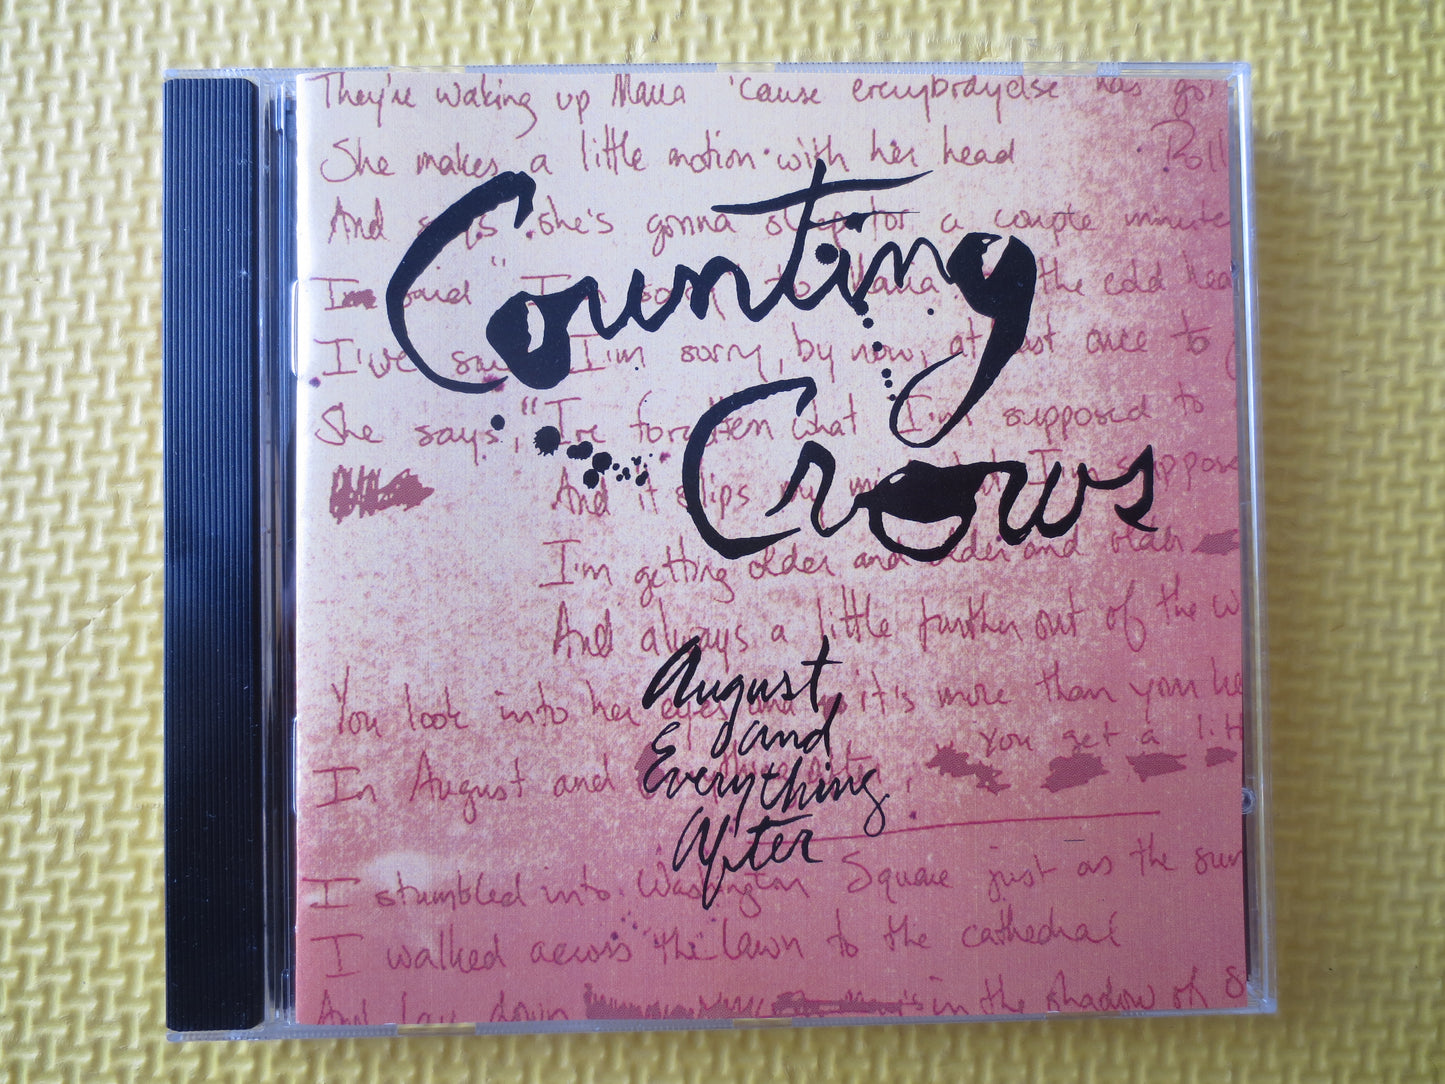 COUNTING CROWS, August and EVERYTHING, Counting Crows Cd, Music Cd, Rock Music Cd, Counting Crows Album, cd, 1993 Compact Disc